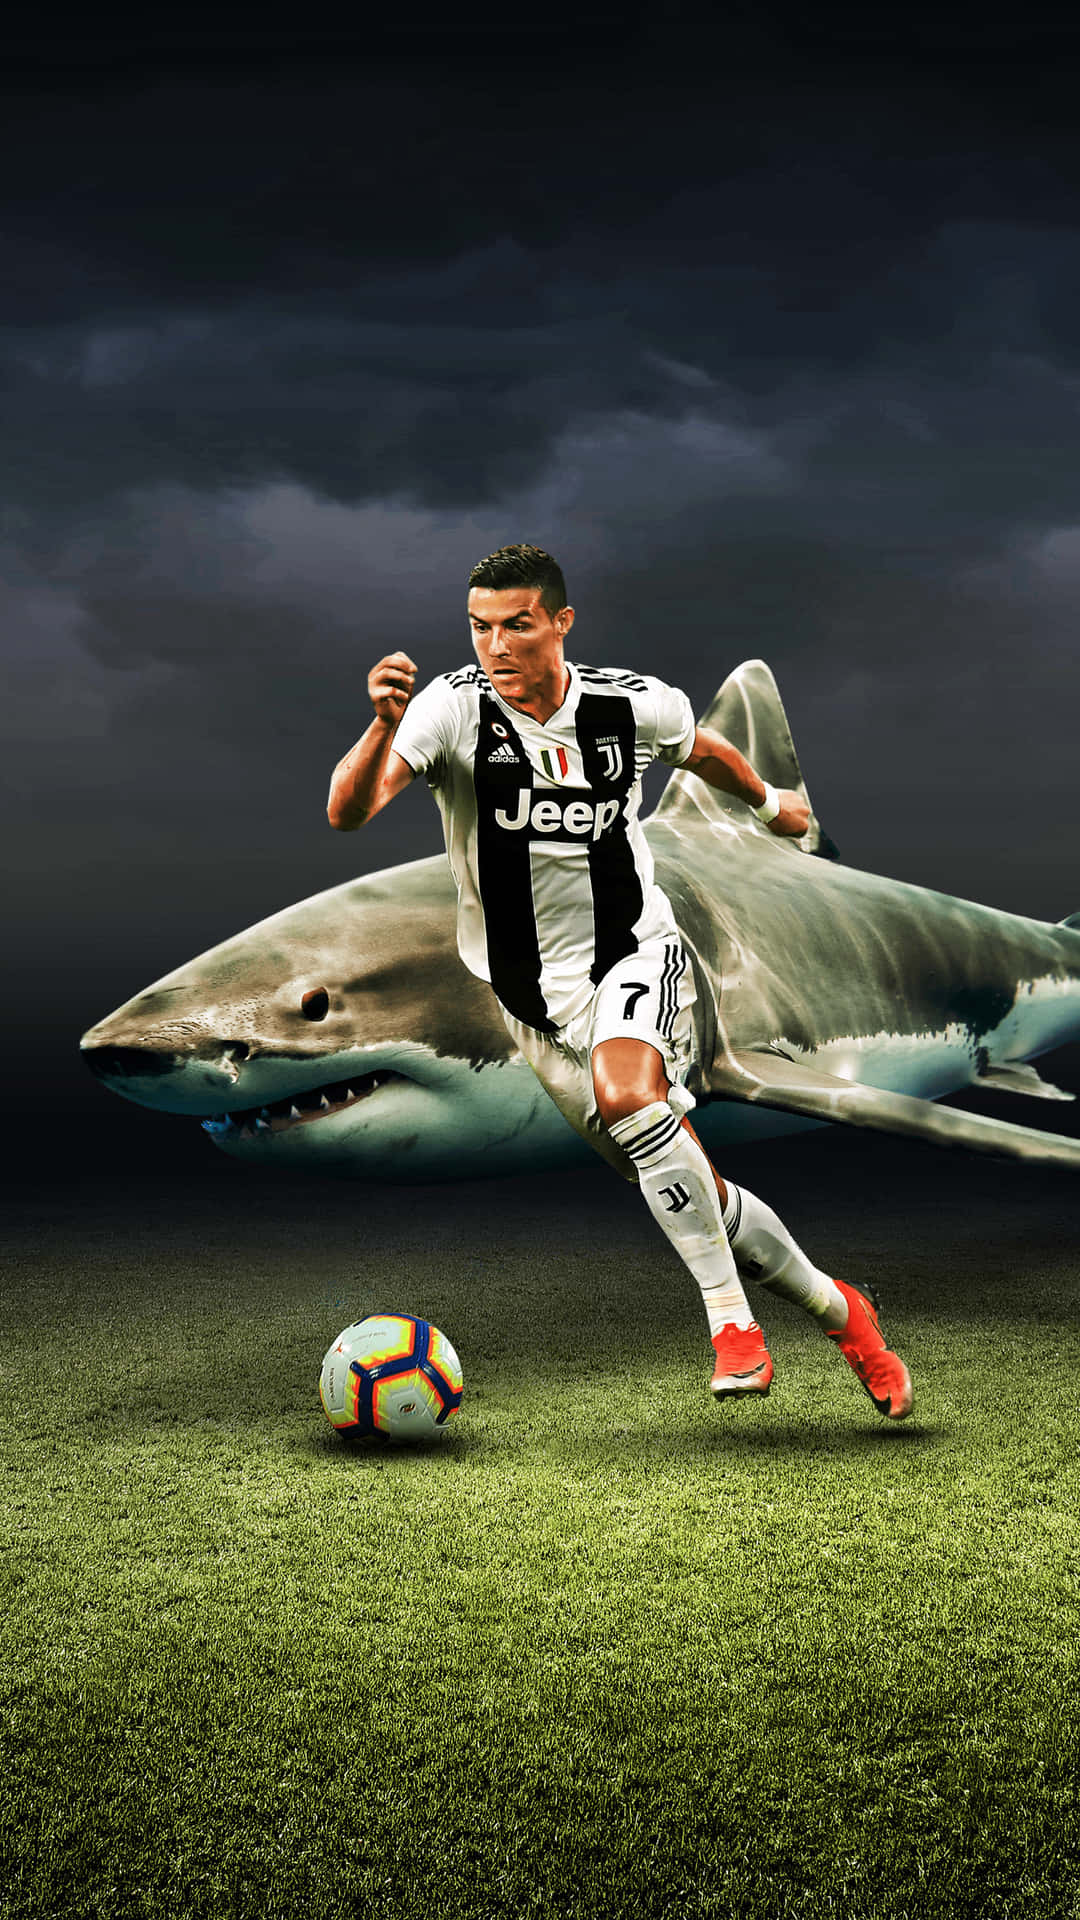 Image  Cristiano Ronaldo about to take a shot in a soccer match Wallpaper